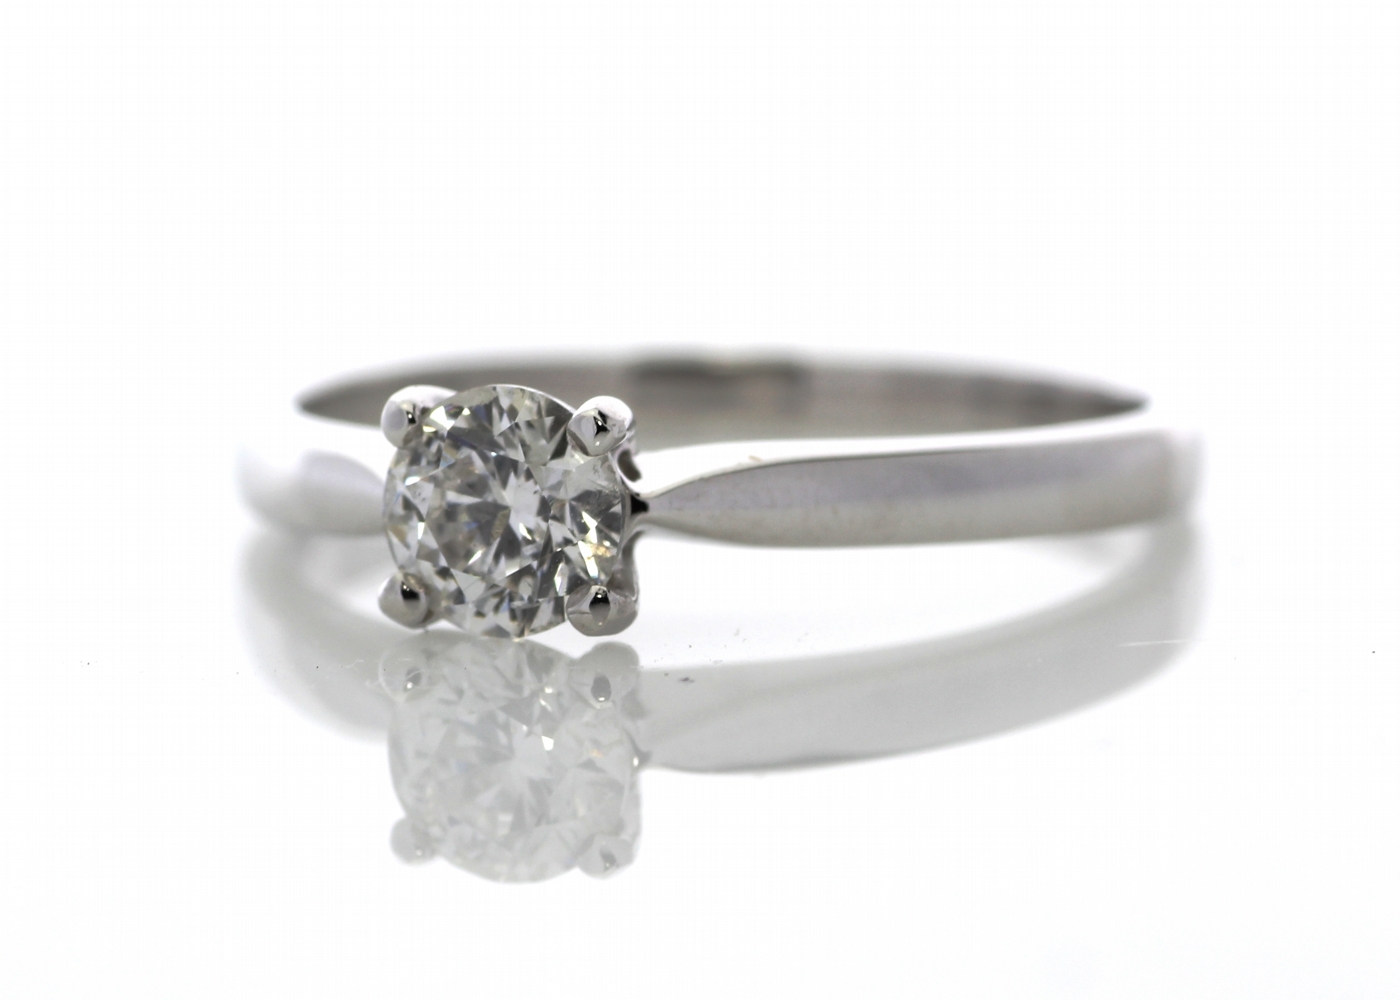 18ct White Gold Solitaire Diamond Ring 0.50 Carats - Image 2 of 7